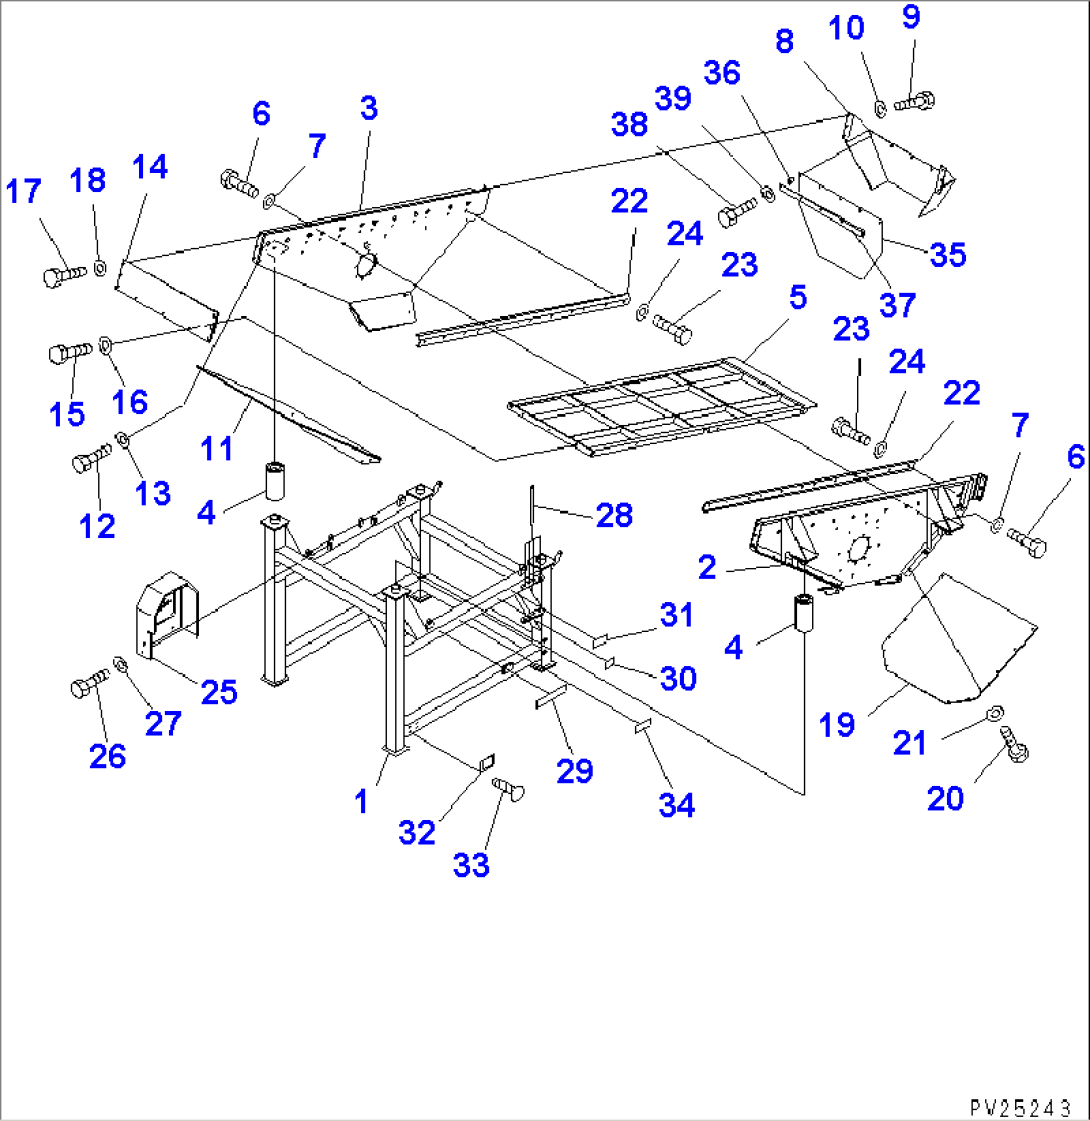 SCREEN SYSTEM (1/5) (FRAME) (DIRECT DRIVE TYPE)